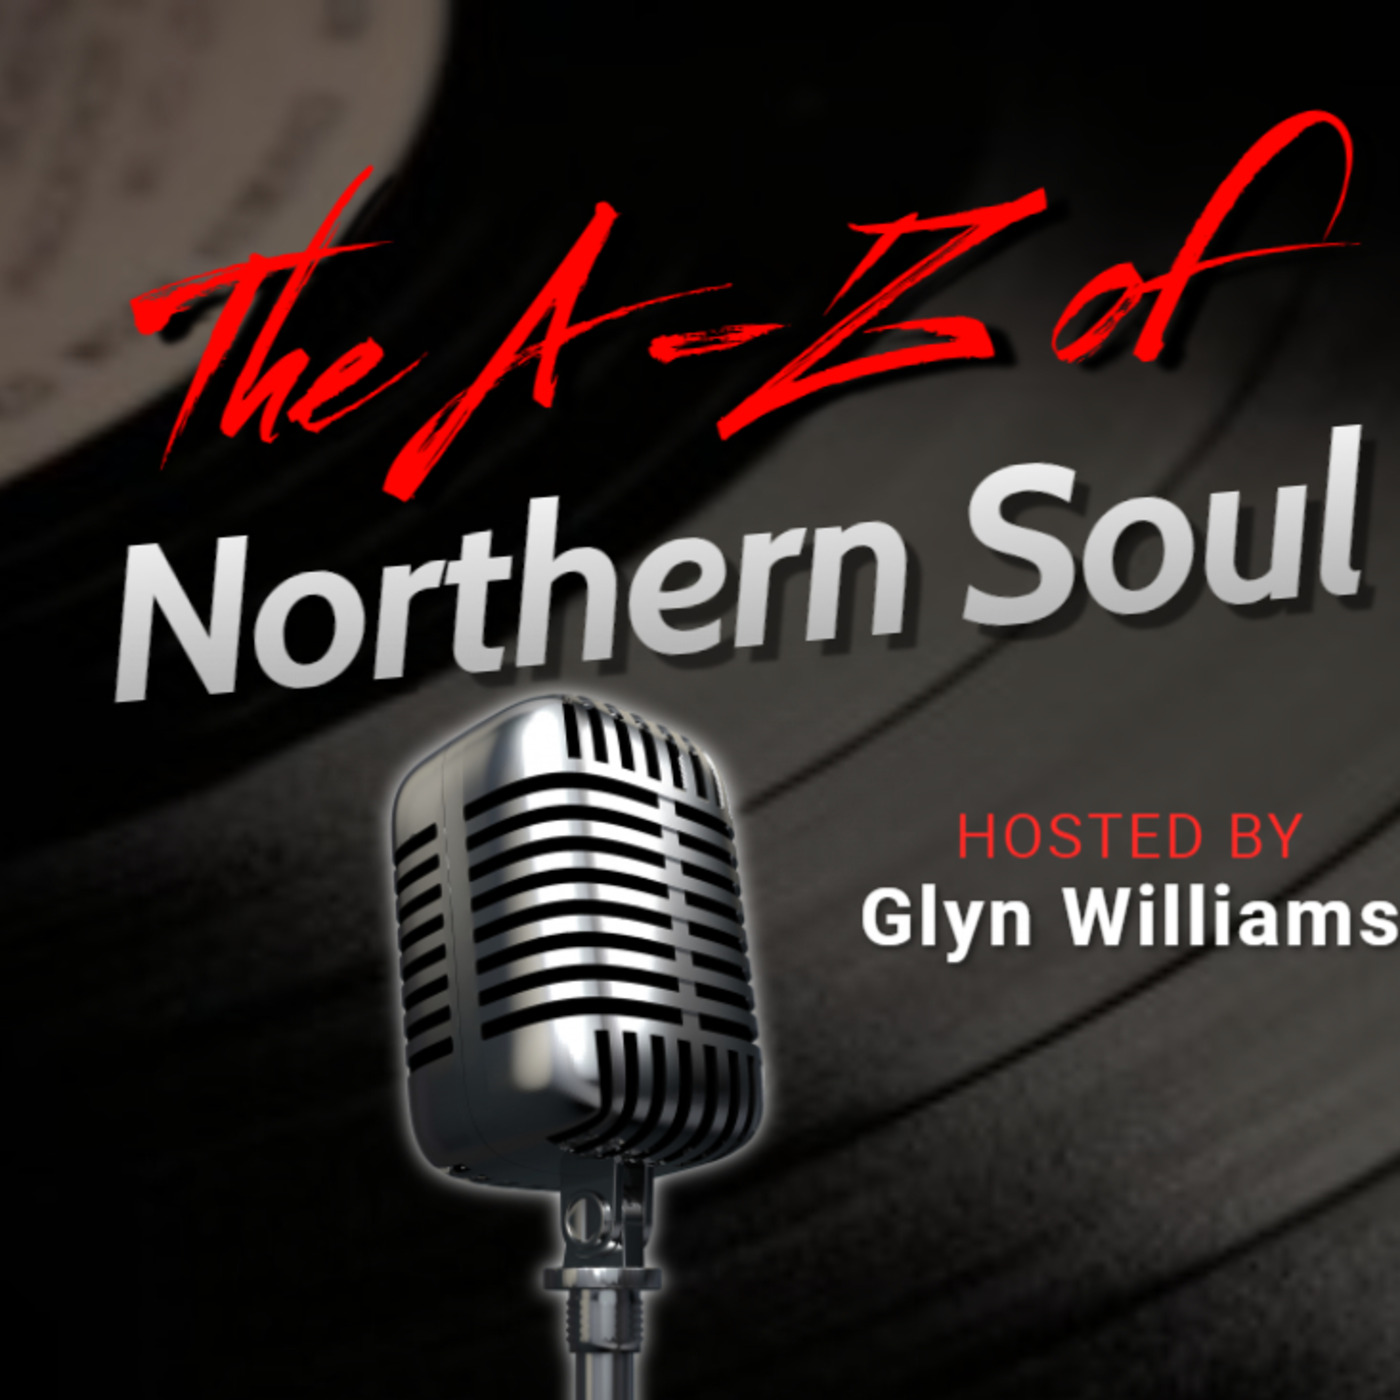 The A-Z of Northern Soul E093